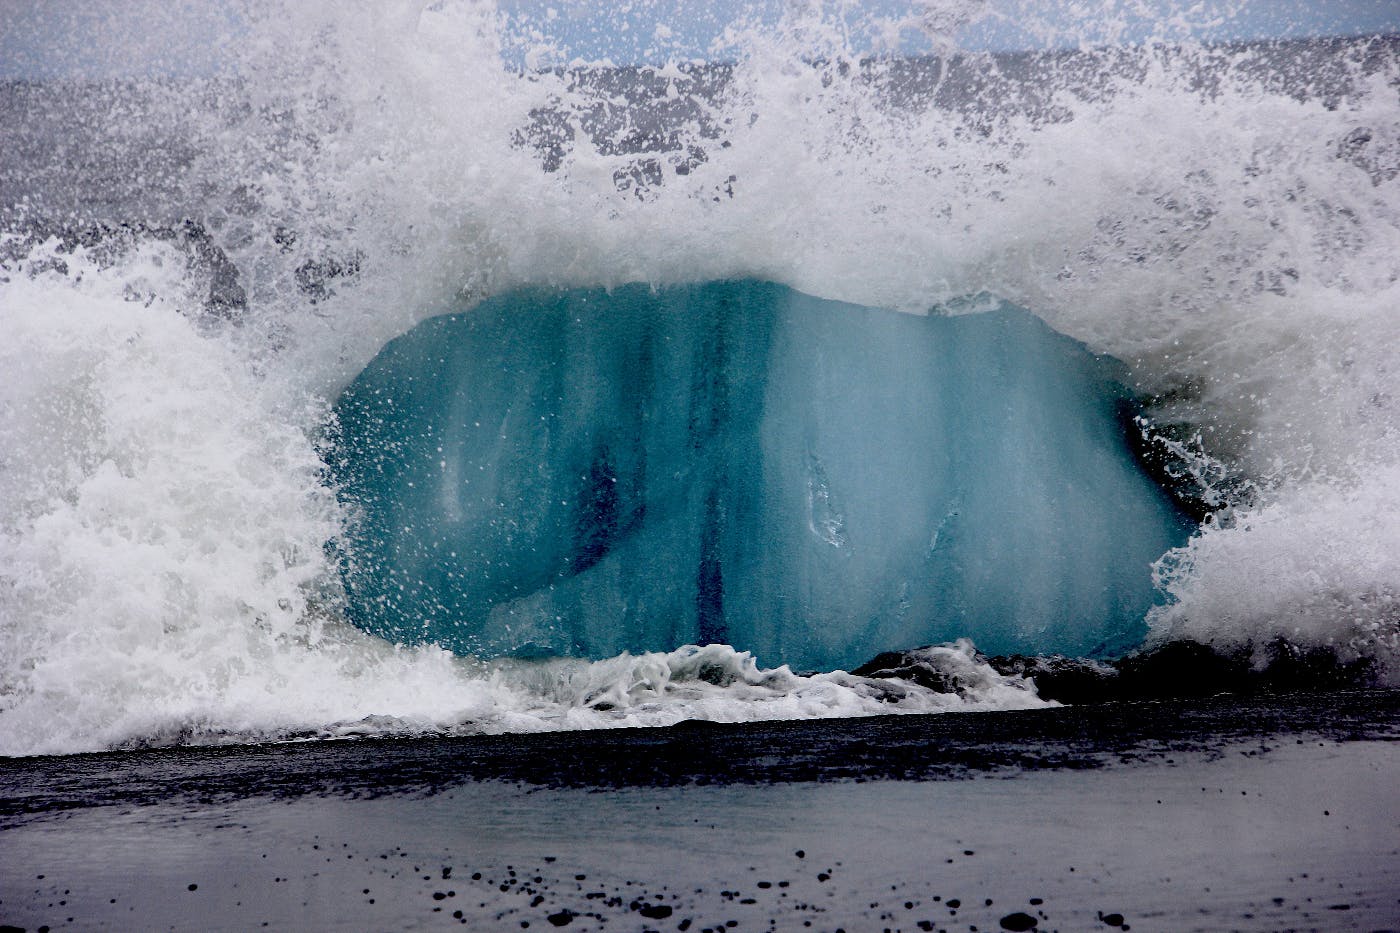 A huge wave crashing on the shore